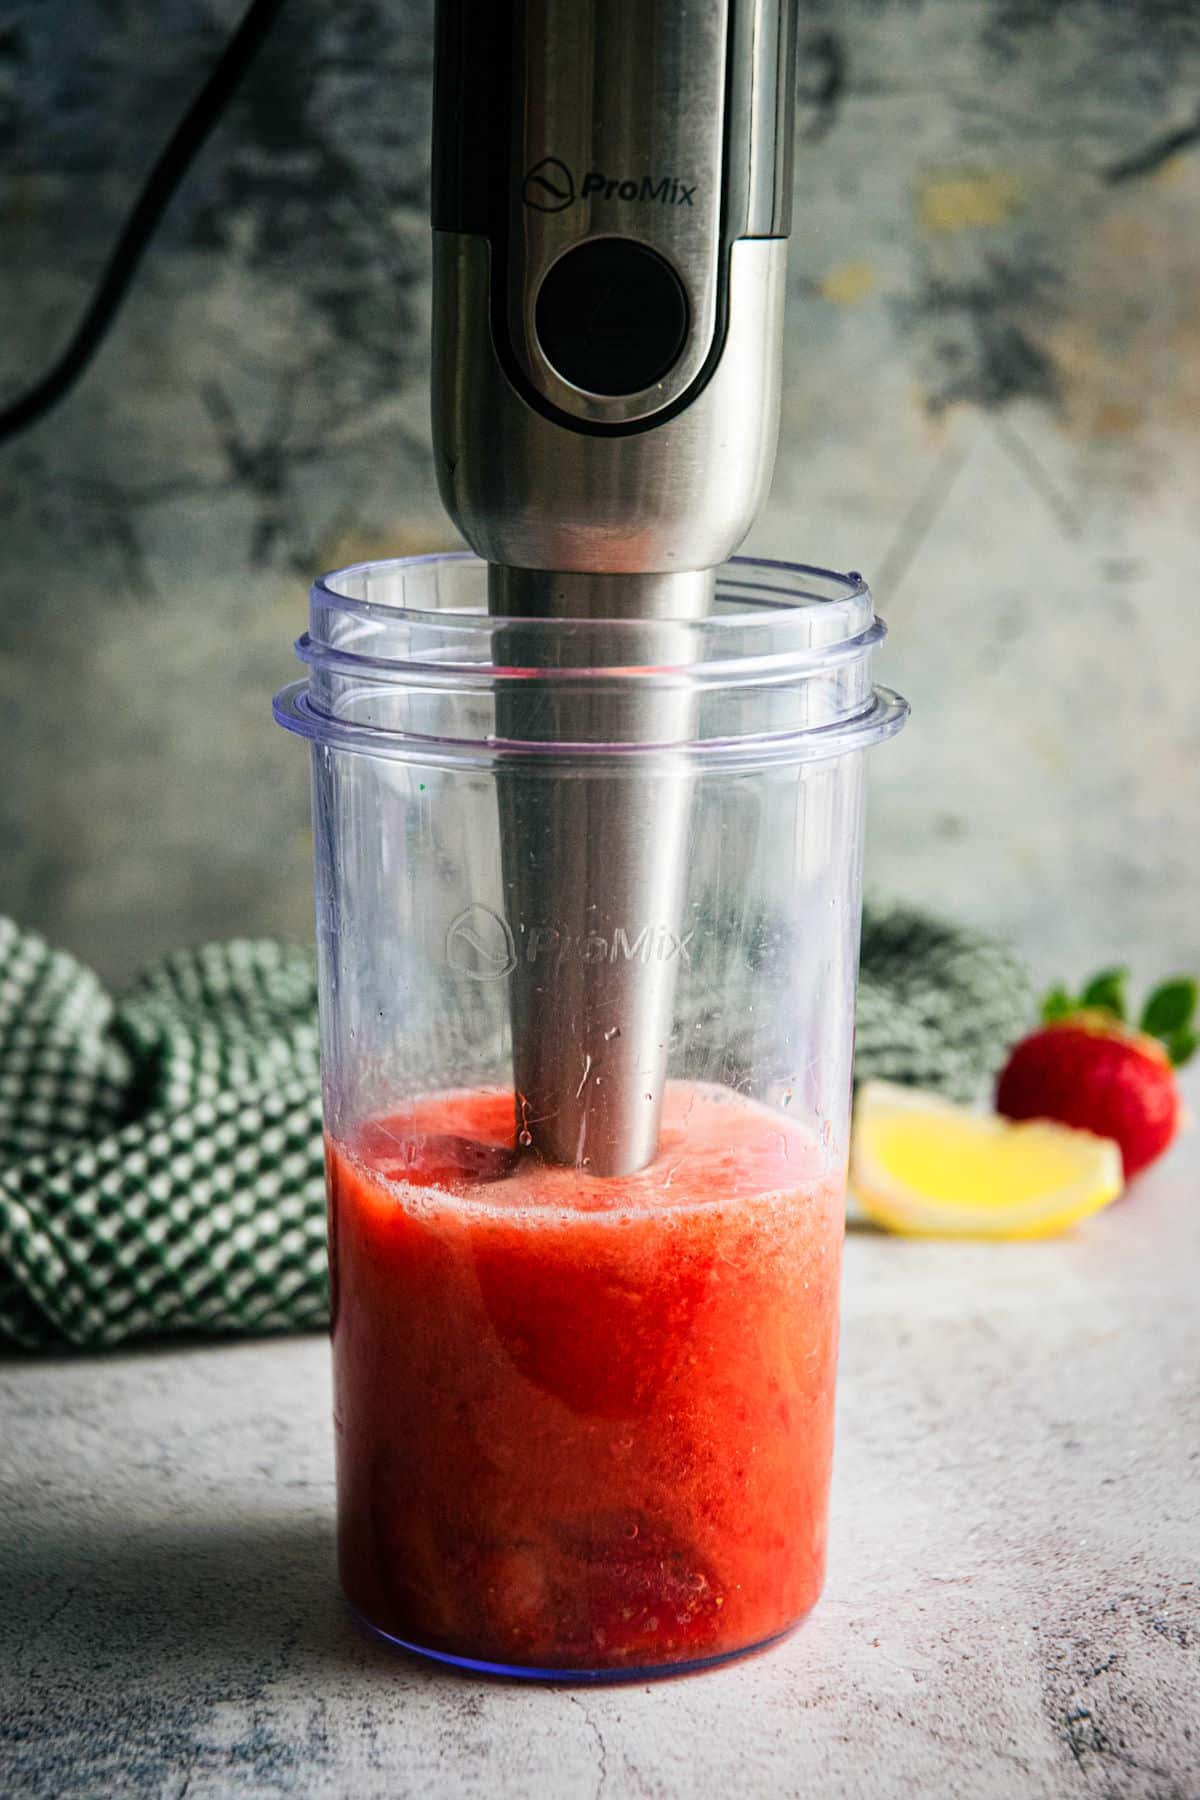 Blender jar with strawberry juice and an immersion blender.